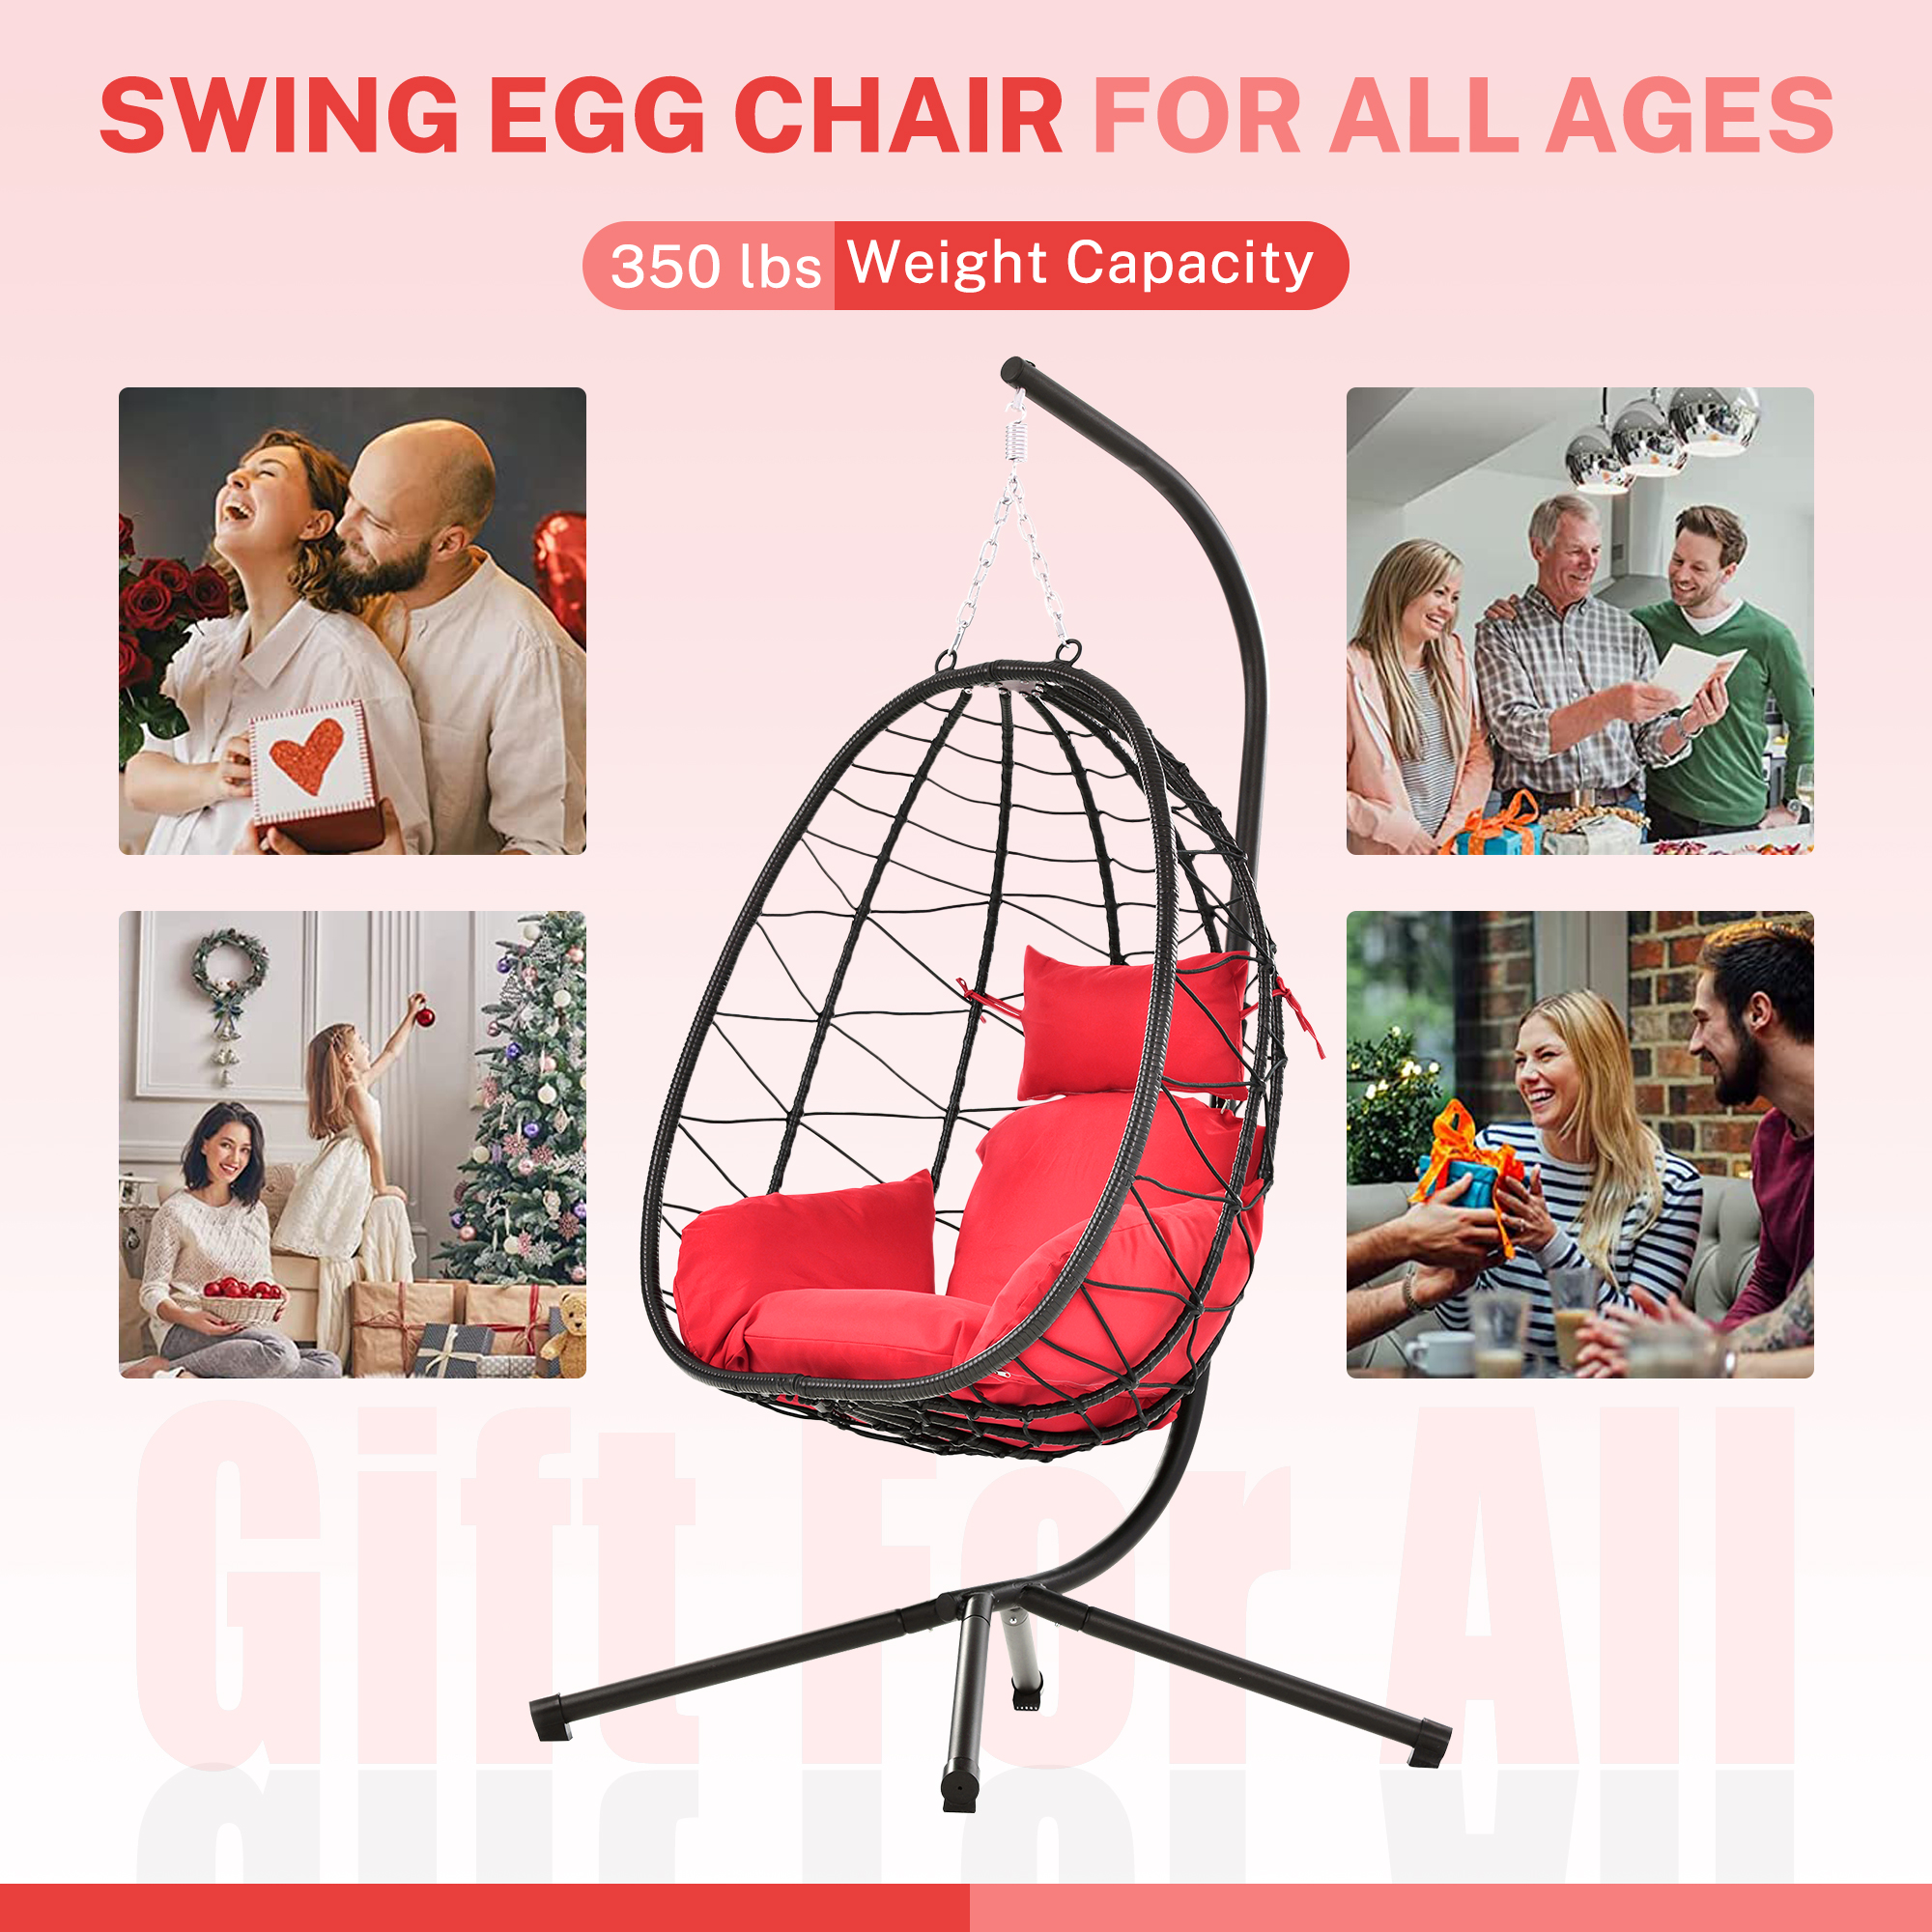 Egg Chair, Indoor Outdoor Patio Wicker Hanging Chair with Stand, Hanging Swing Chair w/ Cushion, Durable All-Weather UV Rattan Lounge Chair for Bedroom, Patio, Deck, Yard, Garden, 350lbs, Red, SS1953 - image 4 of 9